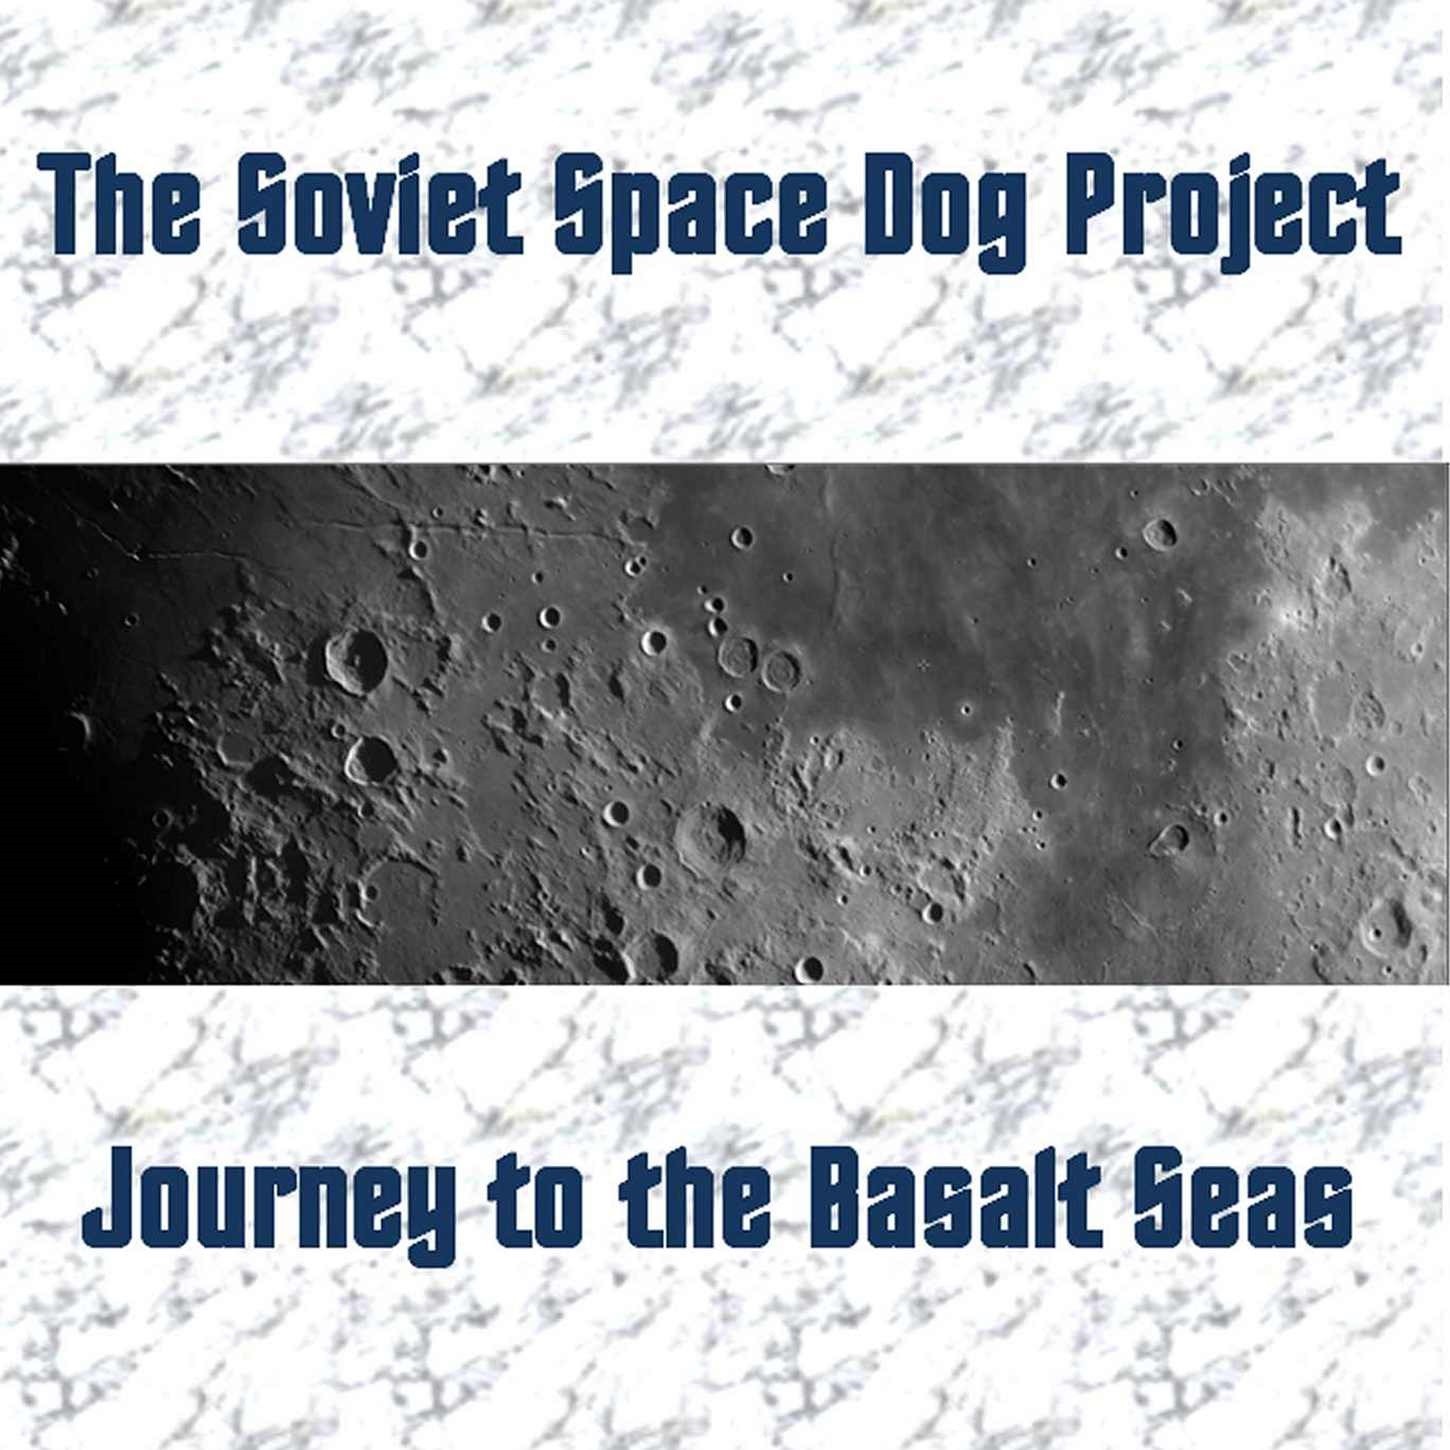 The Soviet Space Dog Project - Journey to the Basalt Seas (2019) [FLAC 24bit/44,1kHz] Download